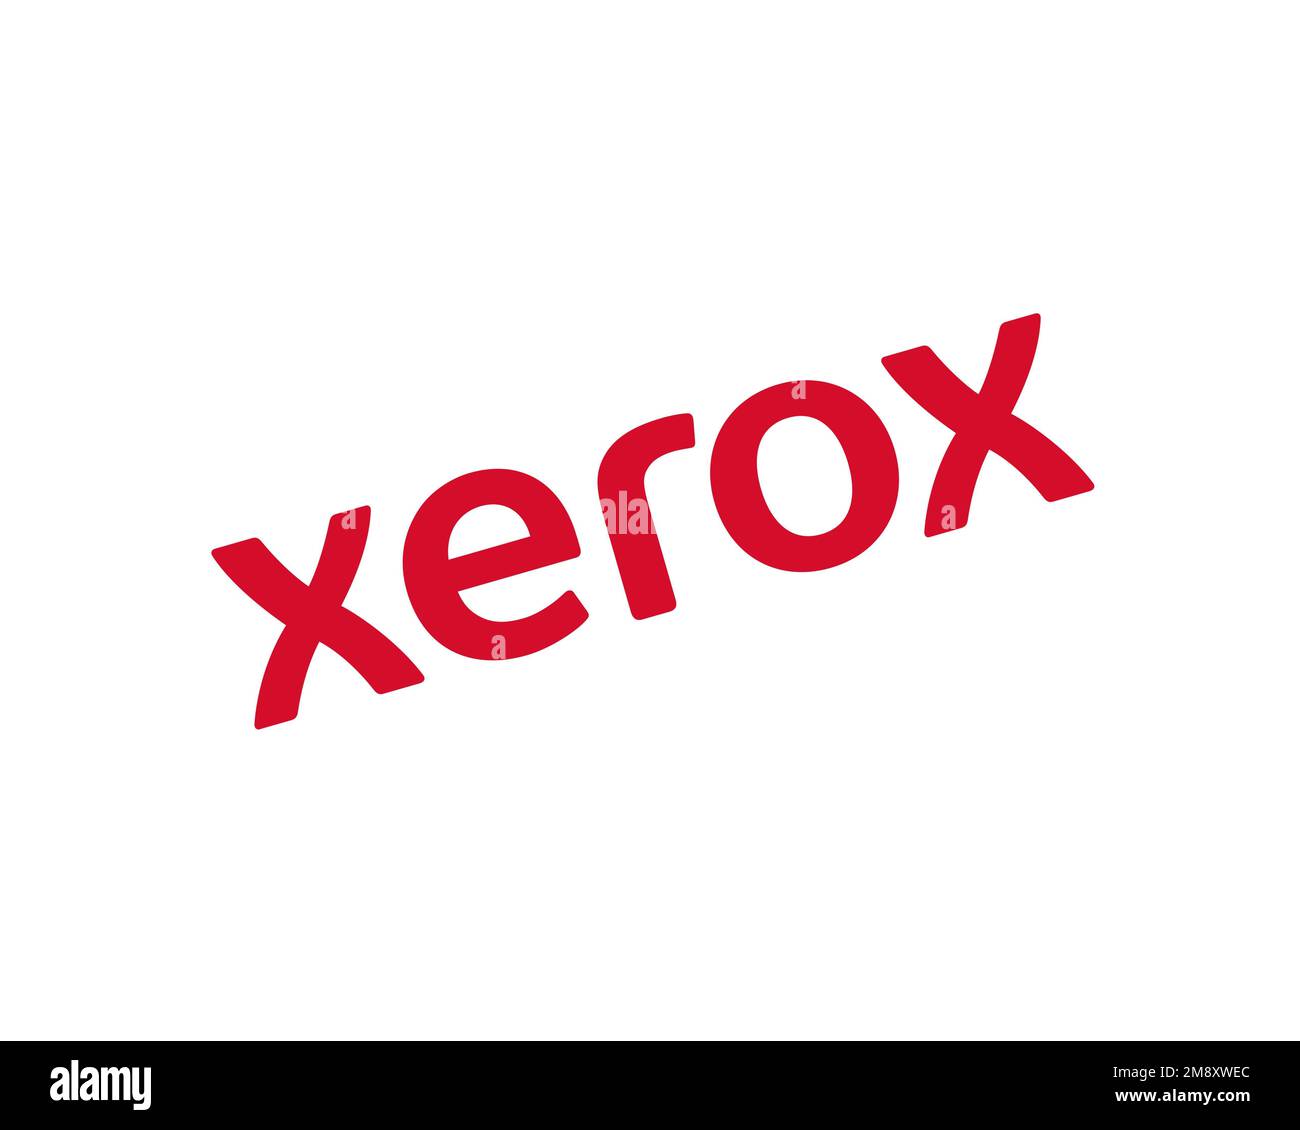 Discover 126+ xerox logo images latest